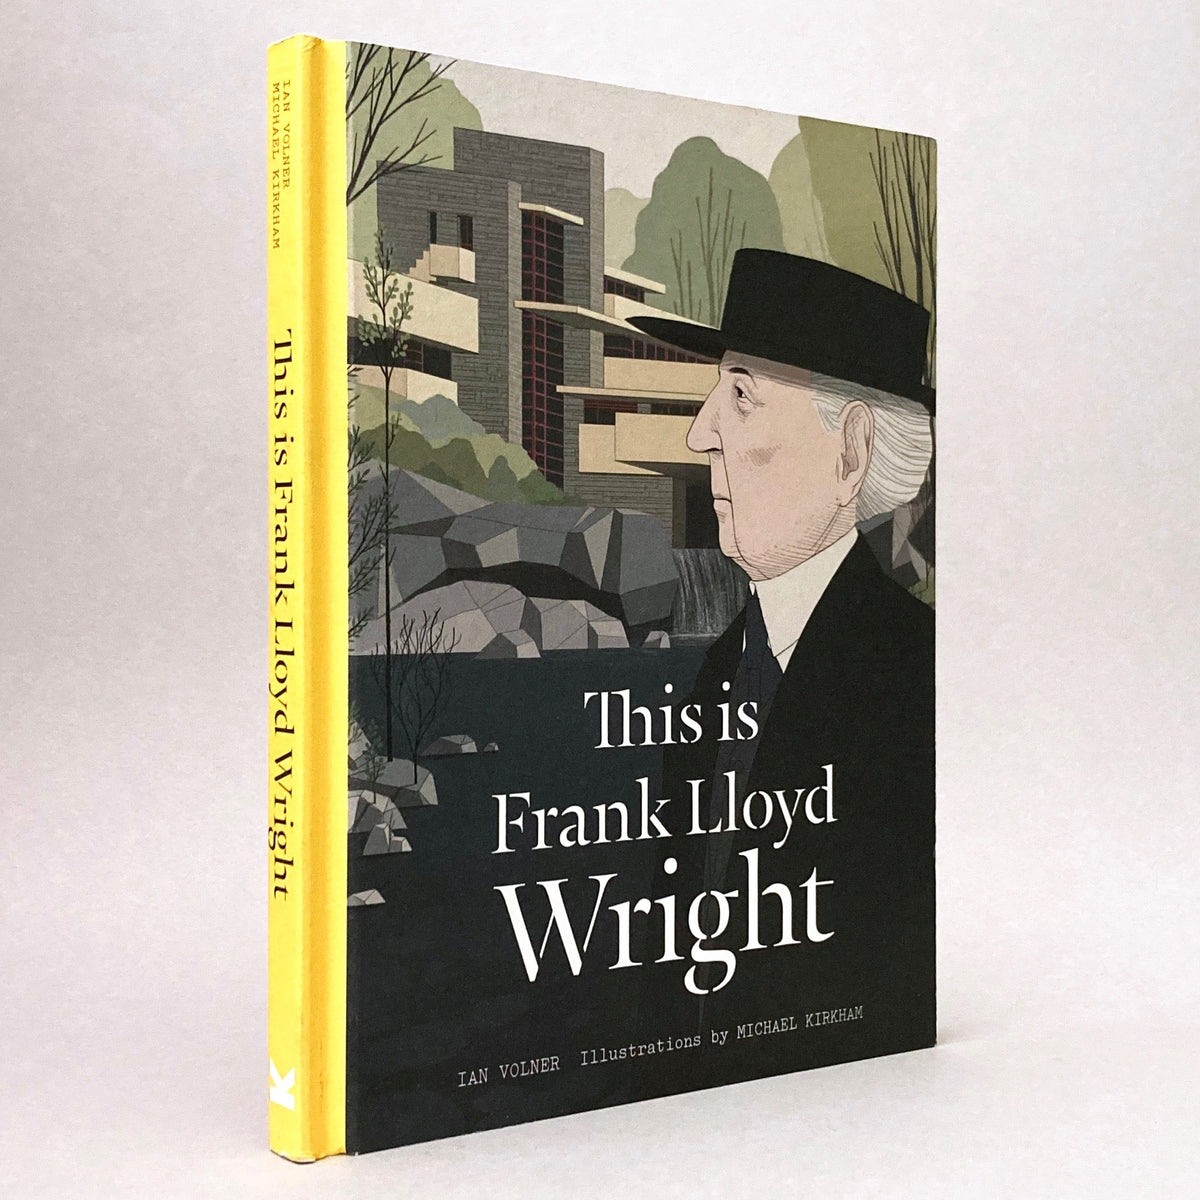 This is Frank Lloyd Wright (Non-mint)